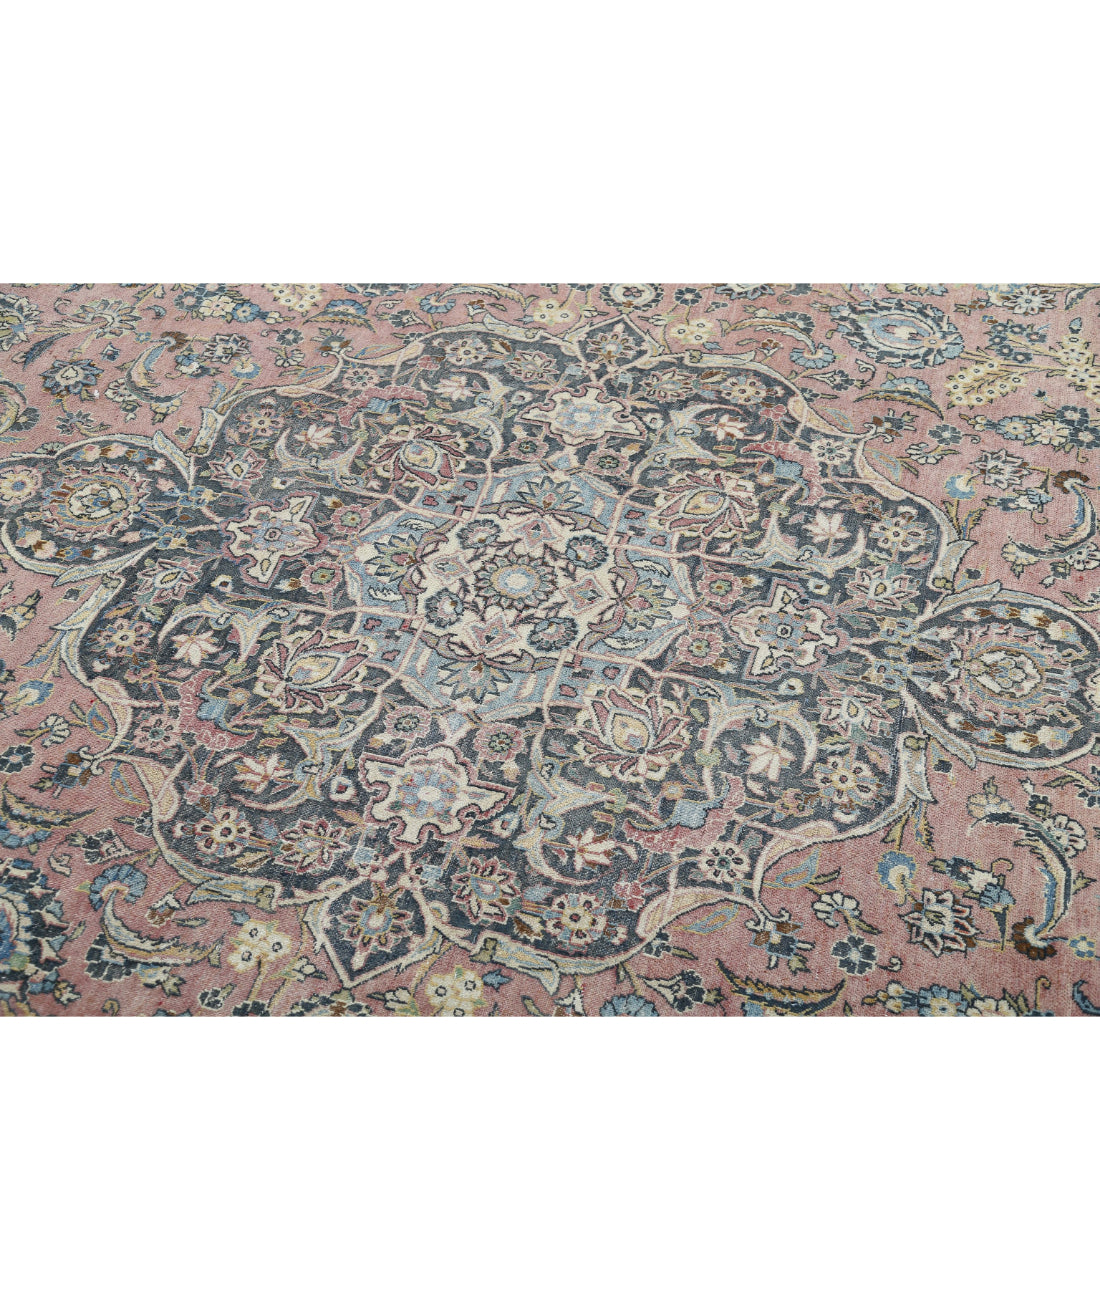 Hand Knotted Vintage Persian Kashan Wool Rug - 11'10'' x 17'3'' 11'10'' x 17'3'' (355 X 518) / Red / Blue